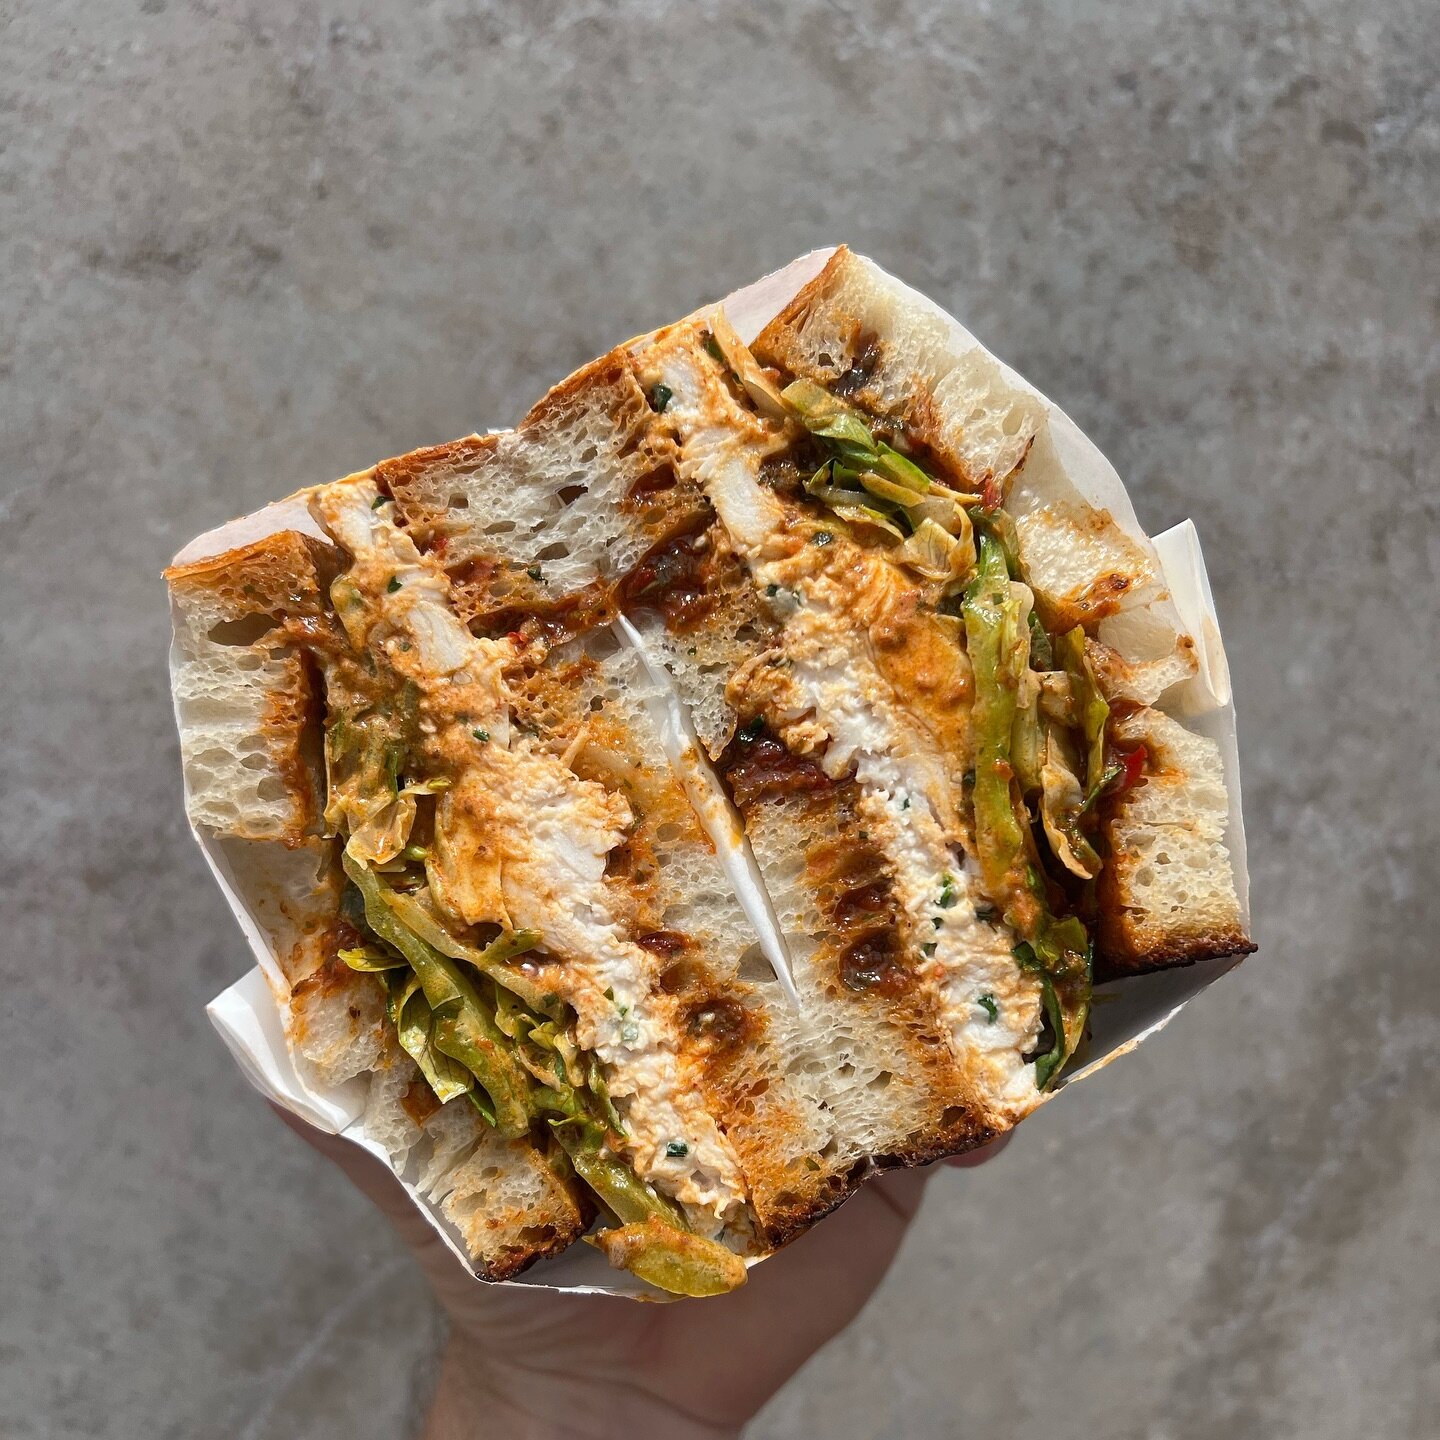 It&rsquo;s hot out there. Wether you&rsquo;re at work or heading to the beach, come through and grab something from our fresh menu. Featuring our herby harissa chicken. Perfect for these scorchers 🥵